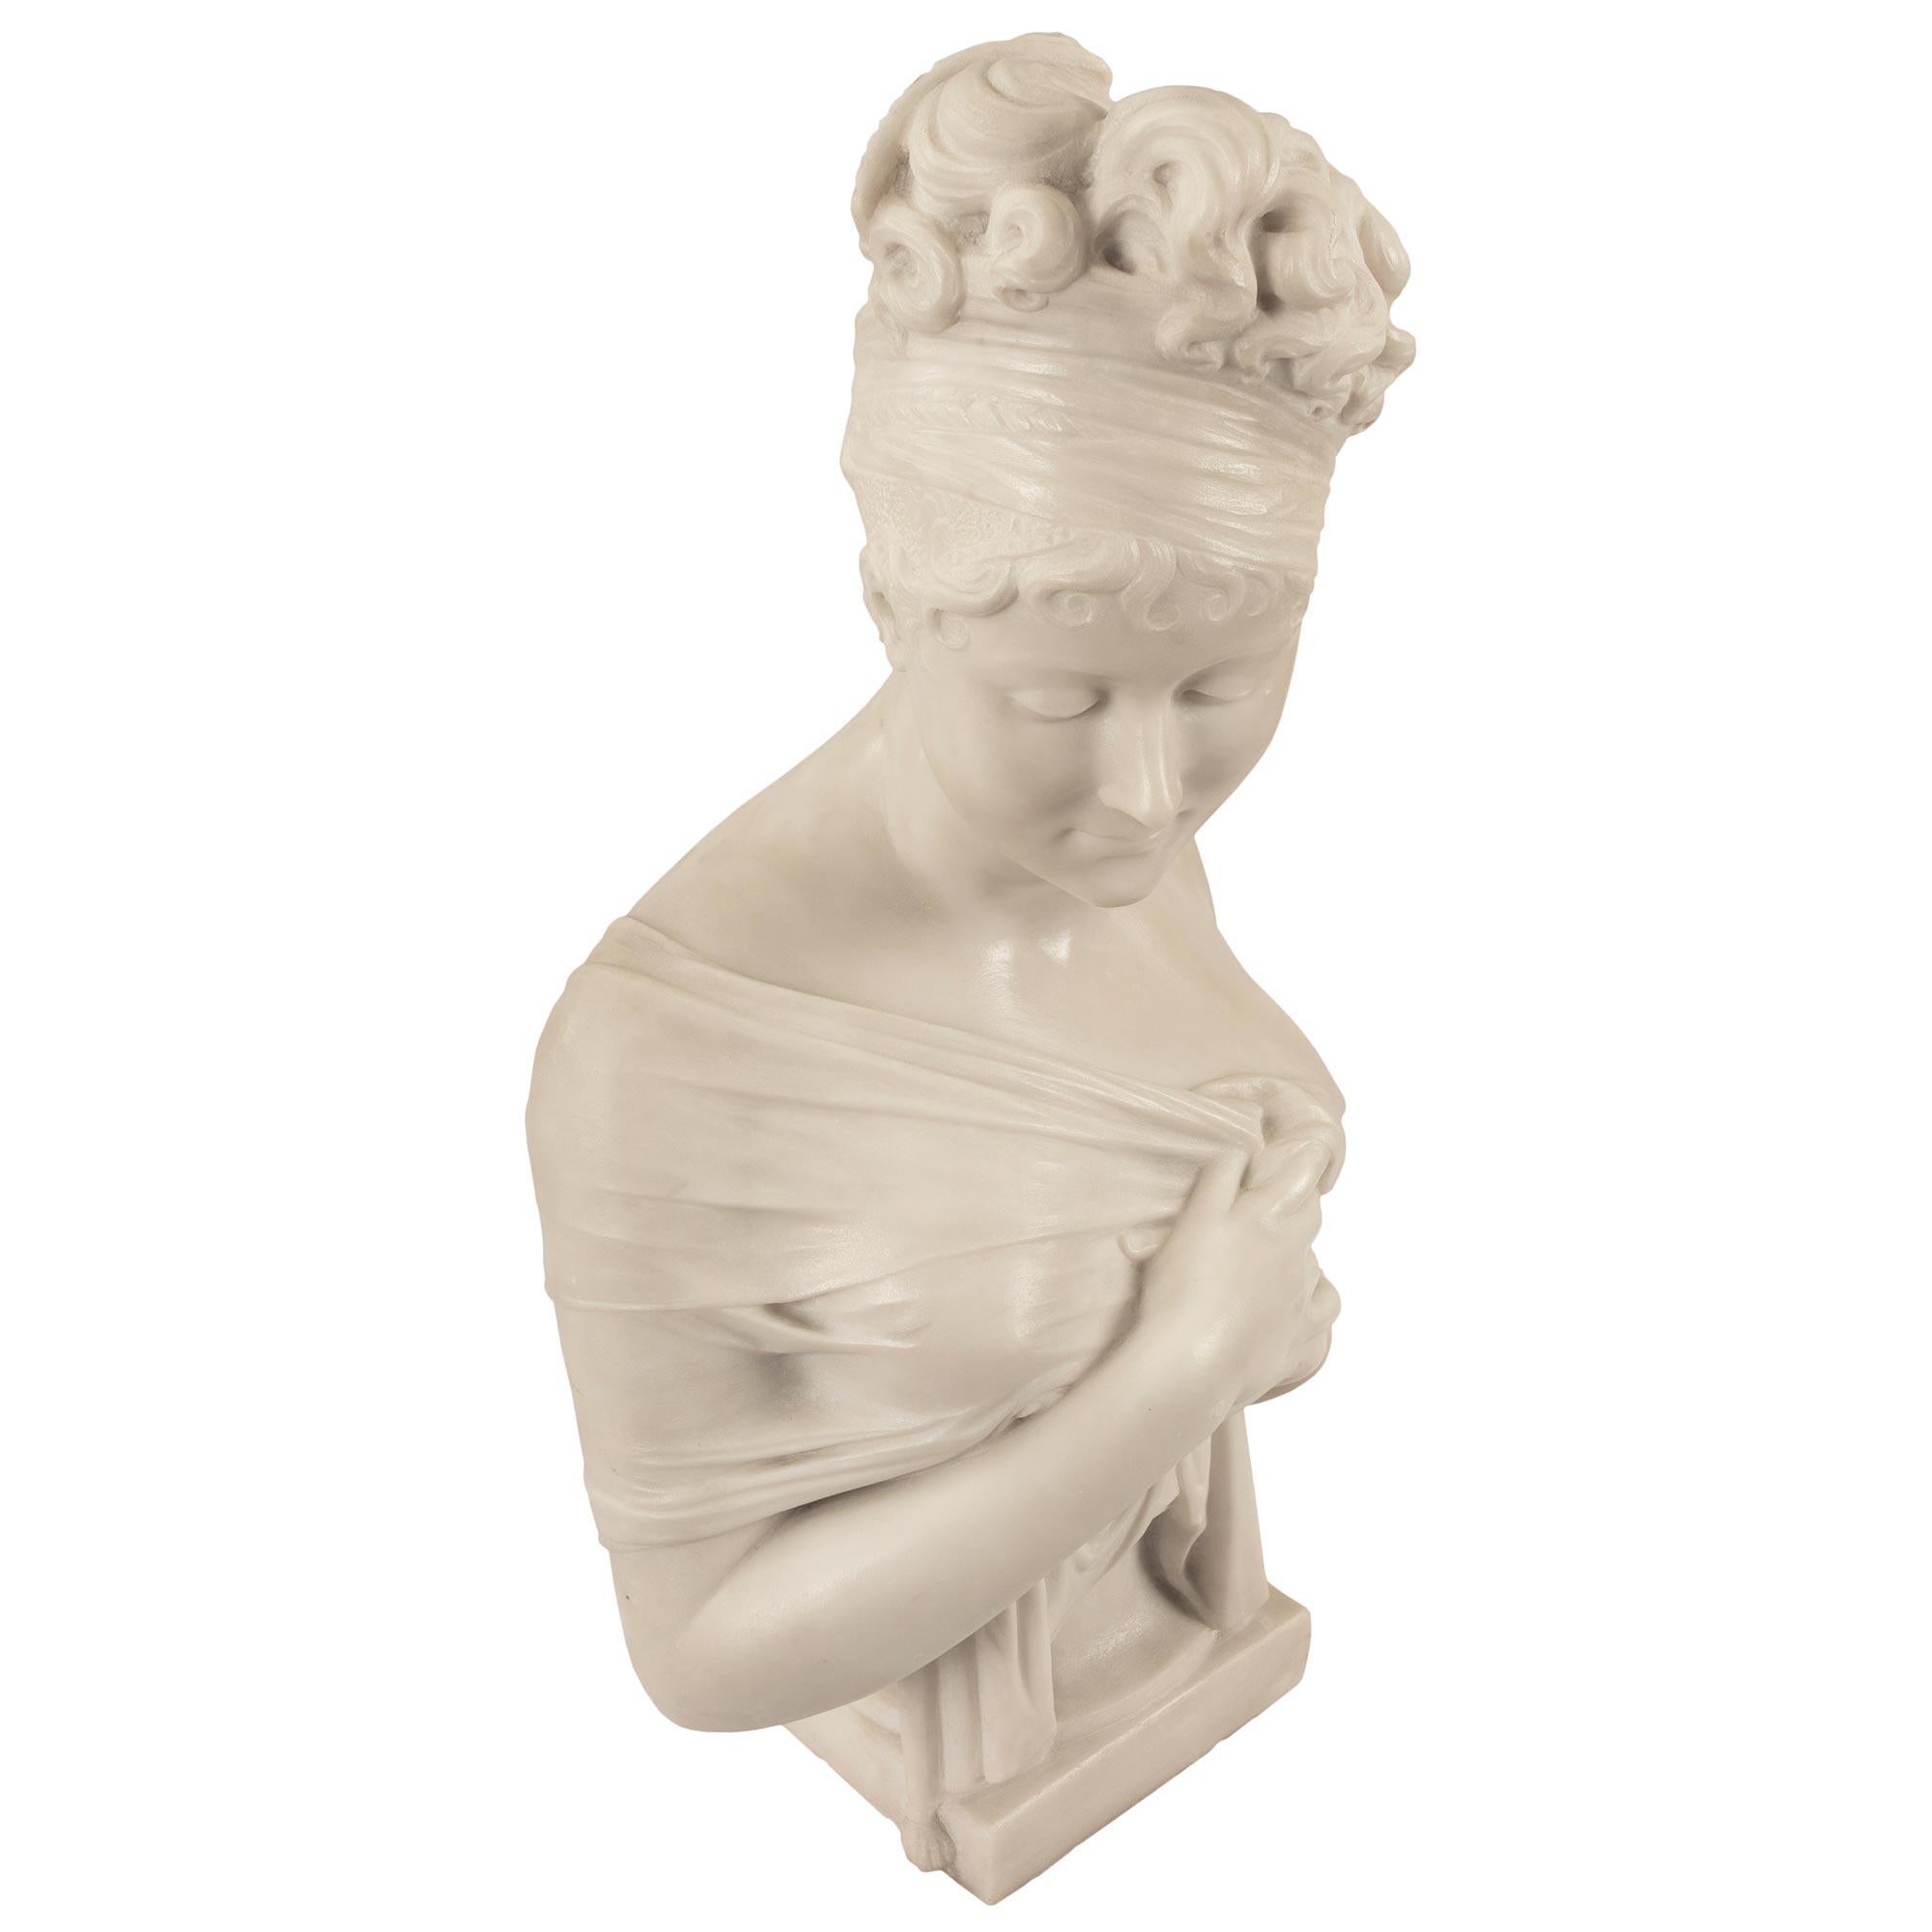 Italian 19th Century Neoclassical St. Carrara Marble Bust of Juliette Recamier In Good Condition For Sale In West Palm Beach, FL